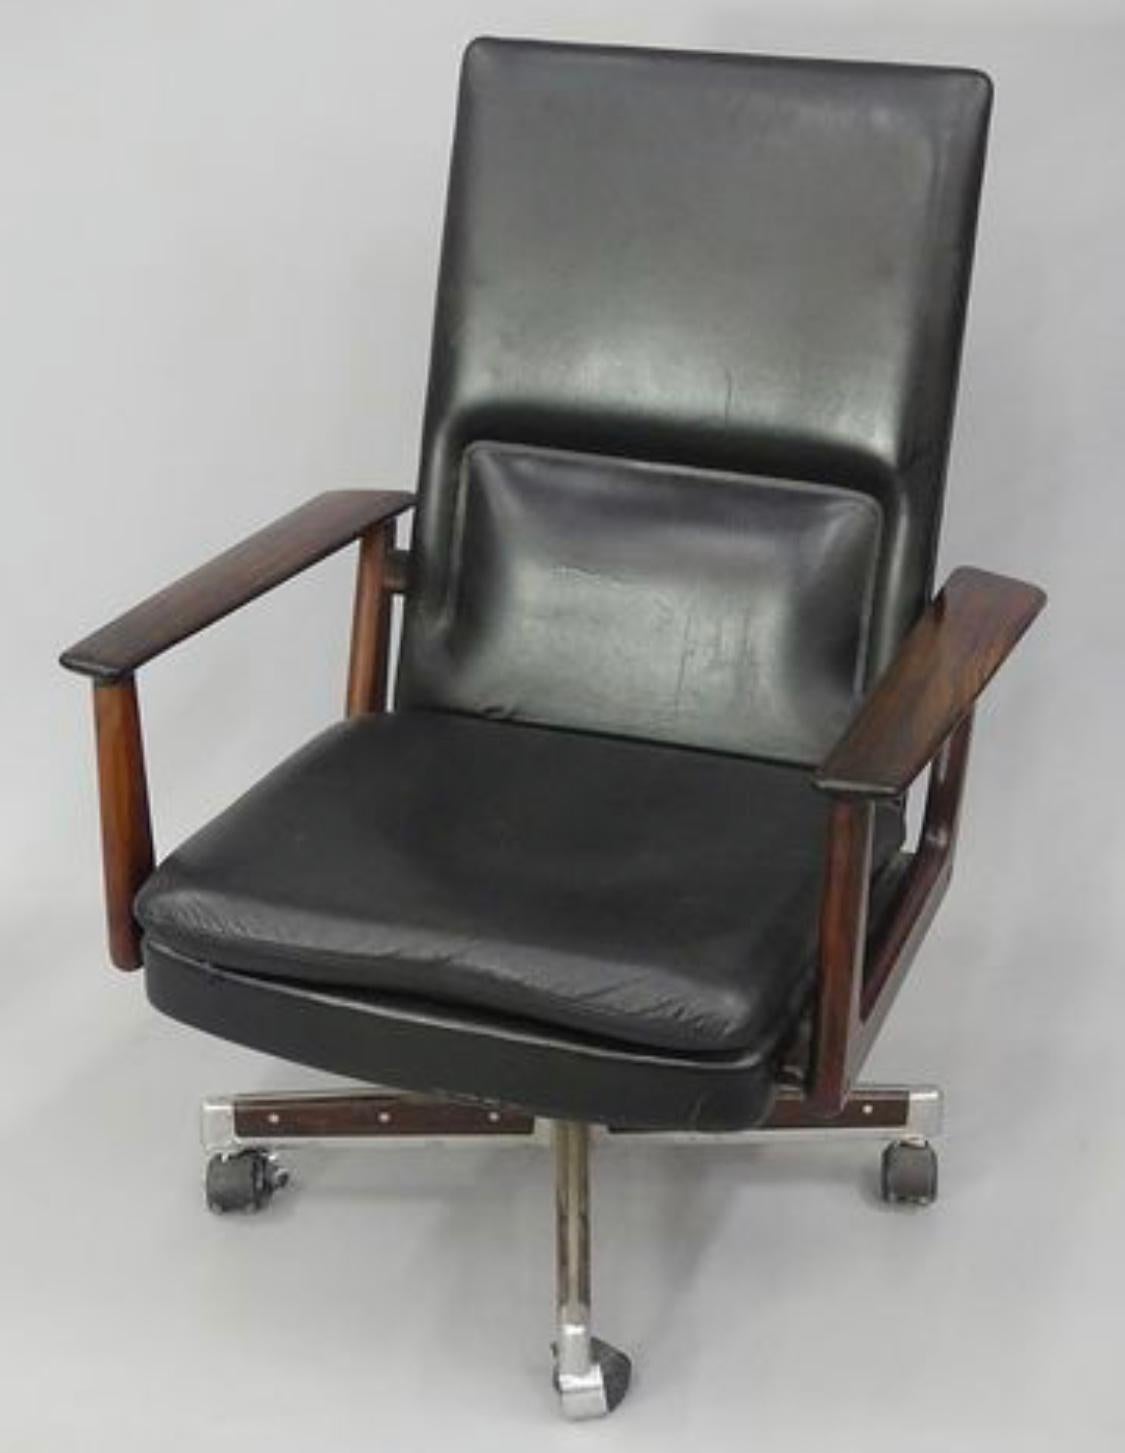 Arne Vodder for Sibast chair in leather and rosewood Perfect condition, 1960
Model 419 office chair by Arne Vodder and manufactured by Sibast Mobler, Denmark, 1960. Rosewood carved armrests, base with rosewood inlay and black aluminum leather